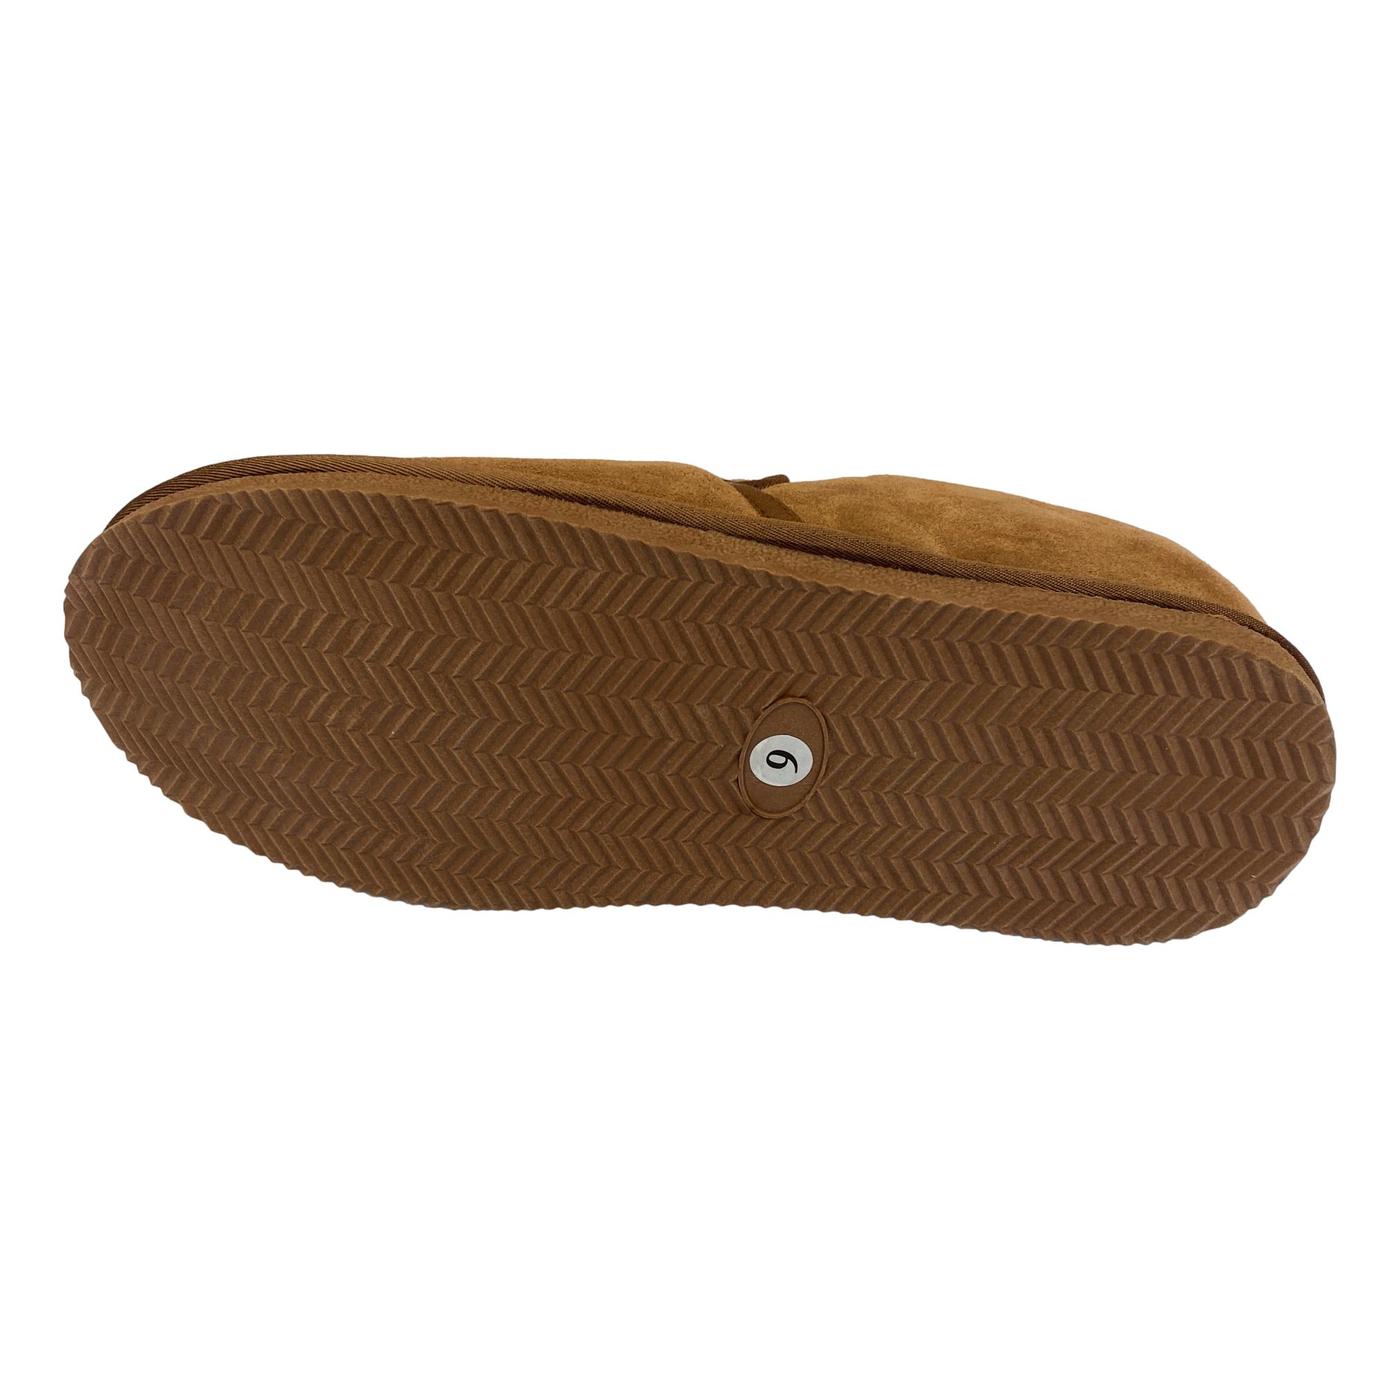 Deluxe Mens 'Elliot' Lambswool Slippers with Hard Sole - Chestnut